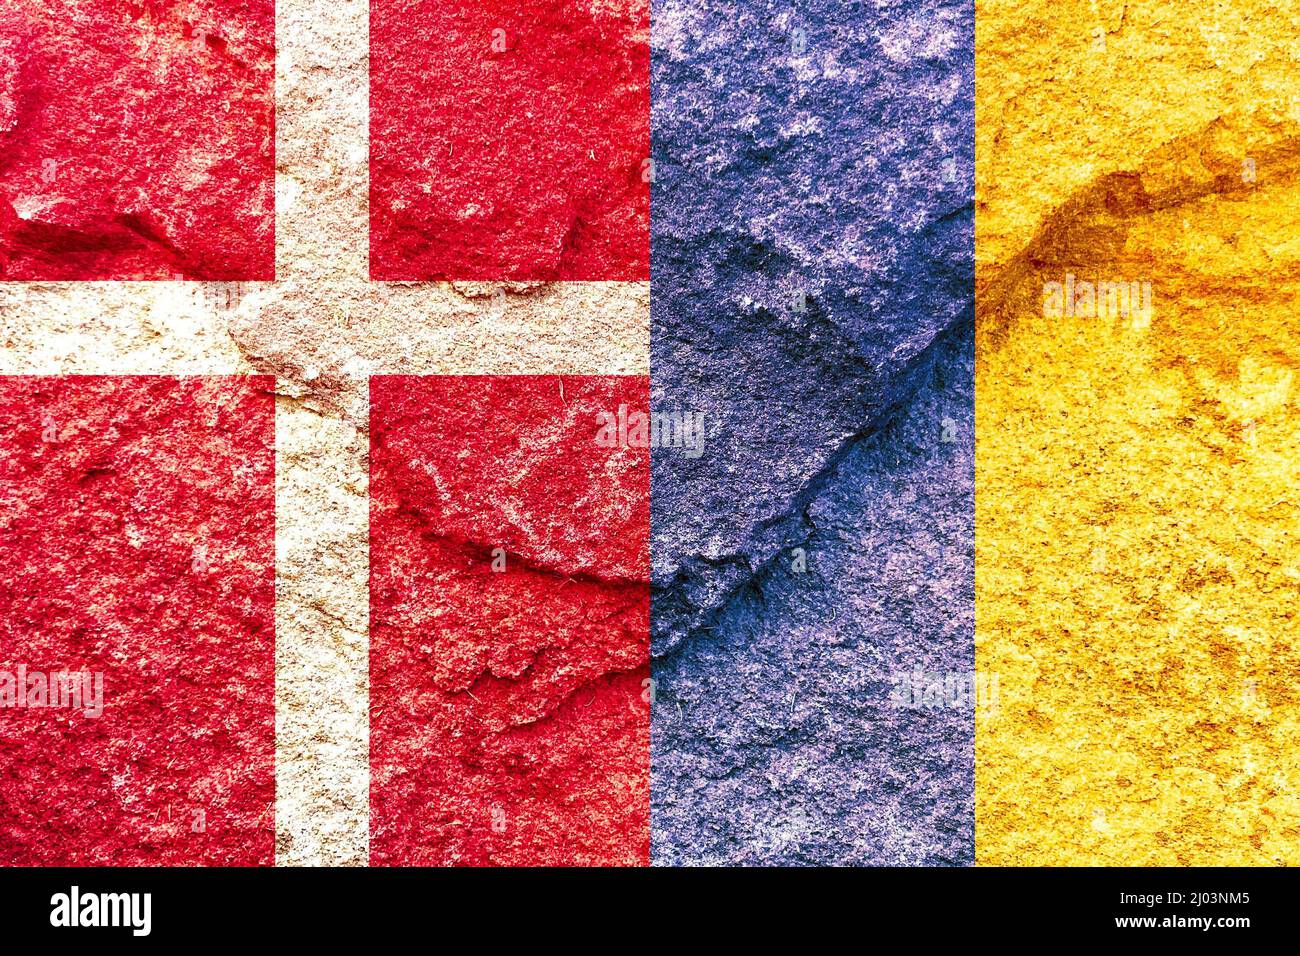 Denmark and Ukraine vertical national flags isolated together on solid rock wall Stock Photo